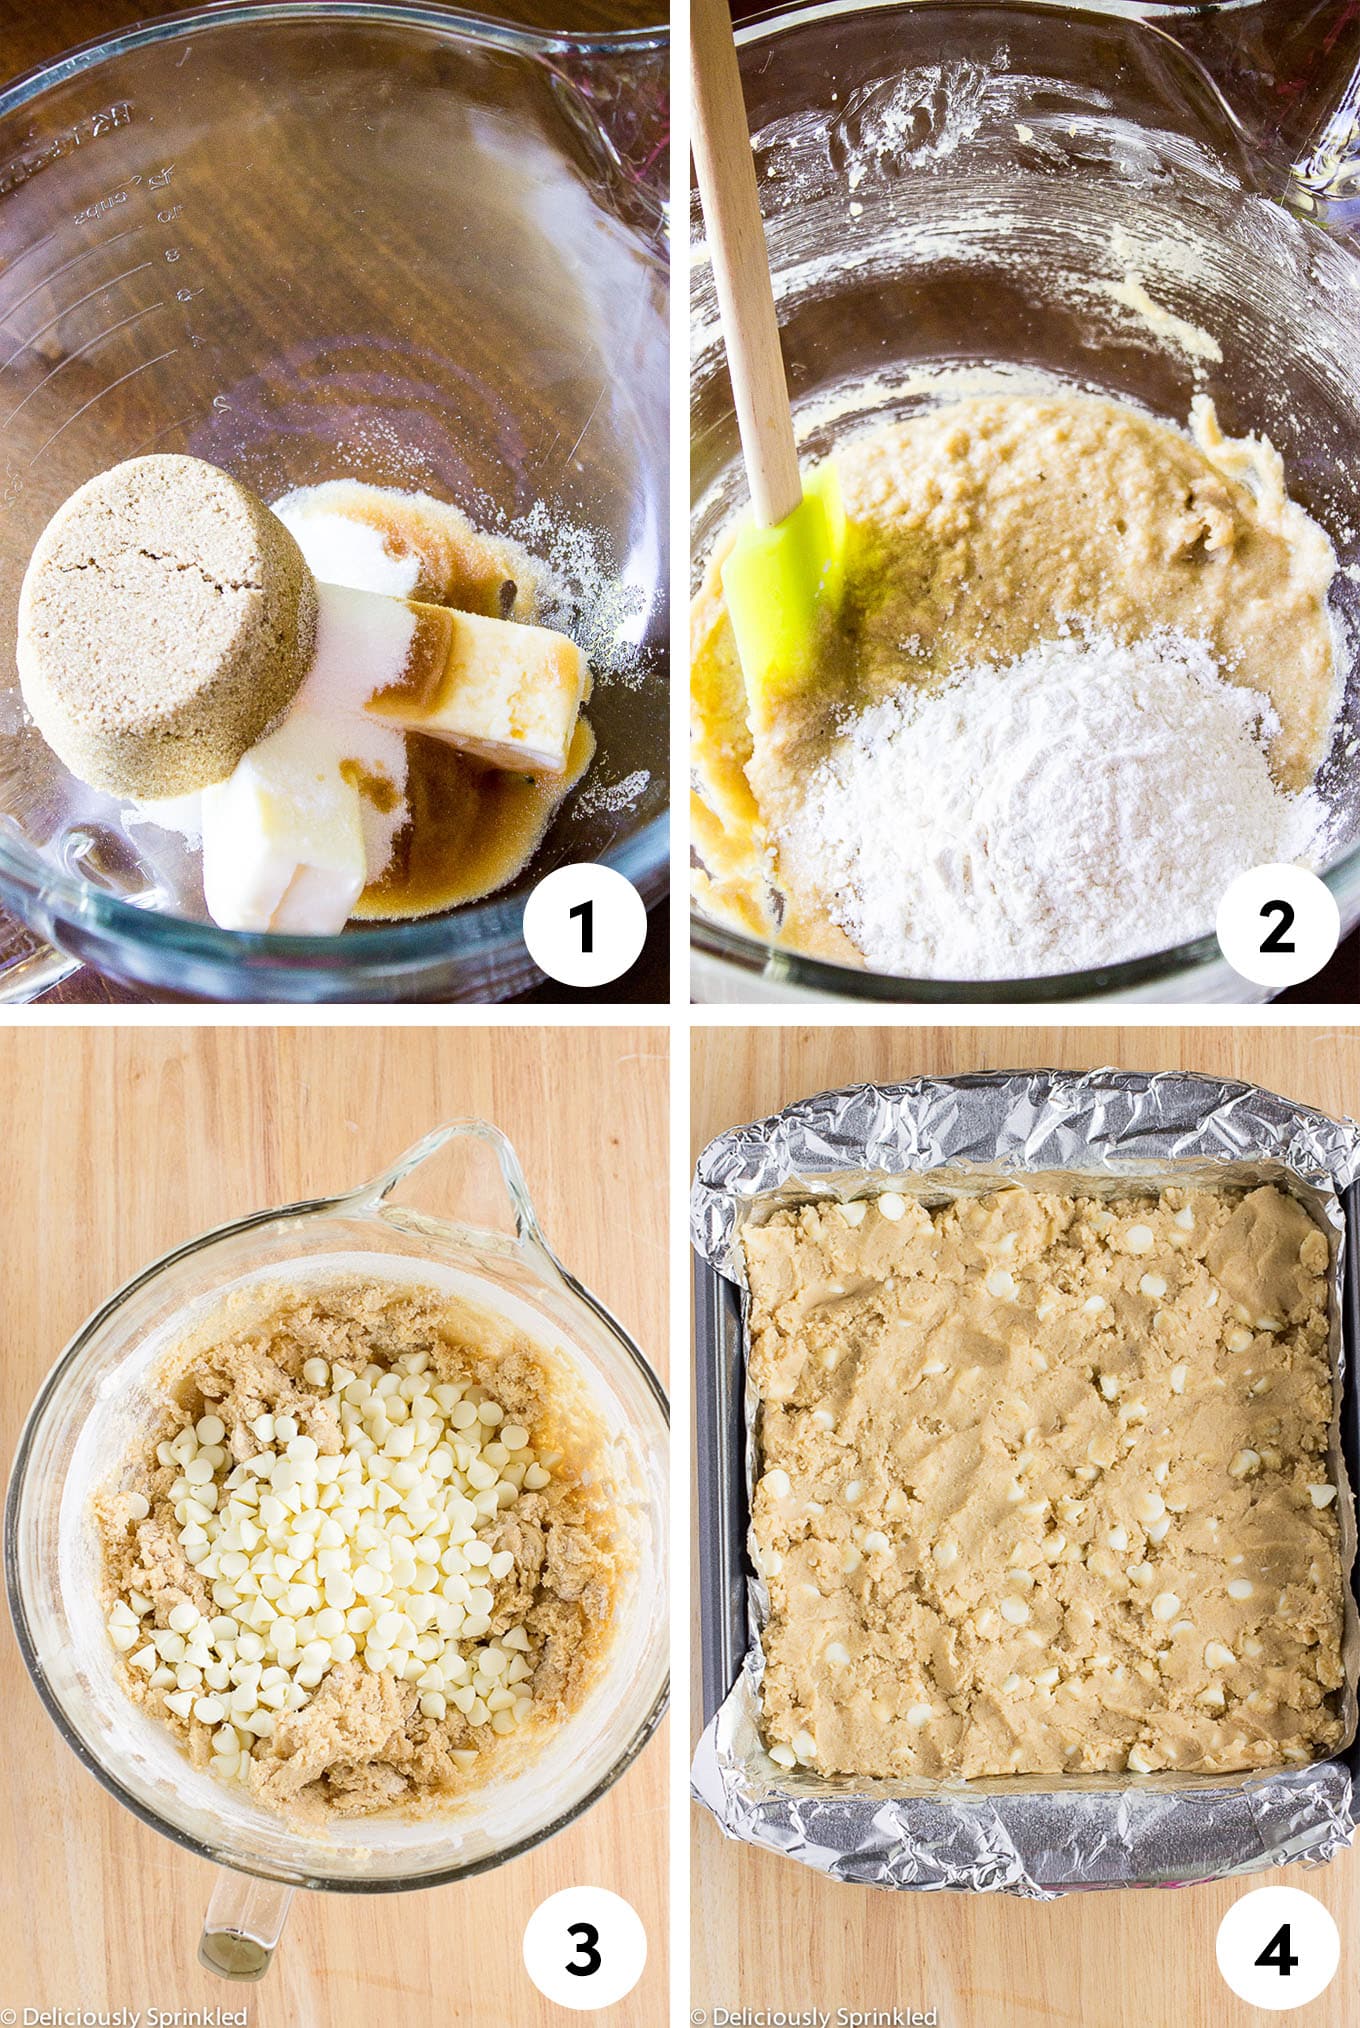 A collage of images showing the ingredients added to the bowl to make white chocolate blondies and then transferred to the baking dish.